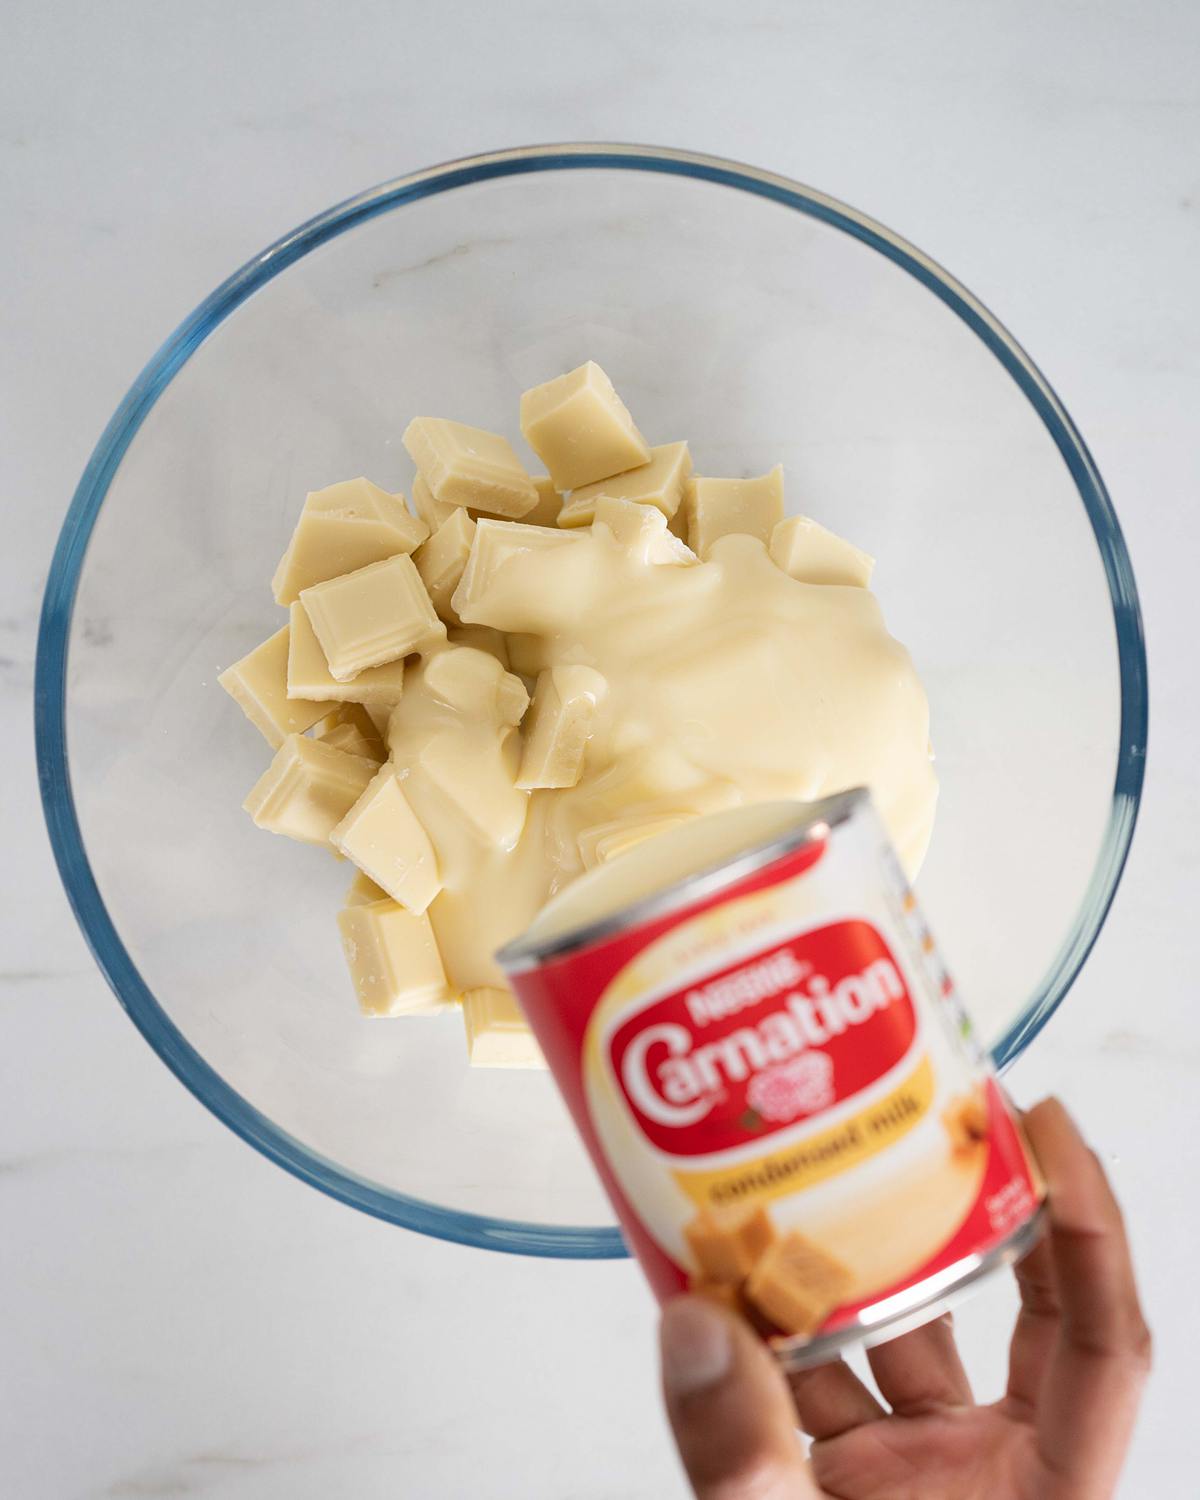 Melt together the white chocolate and condensed milk...